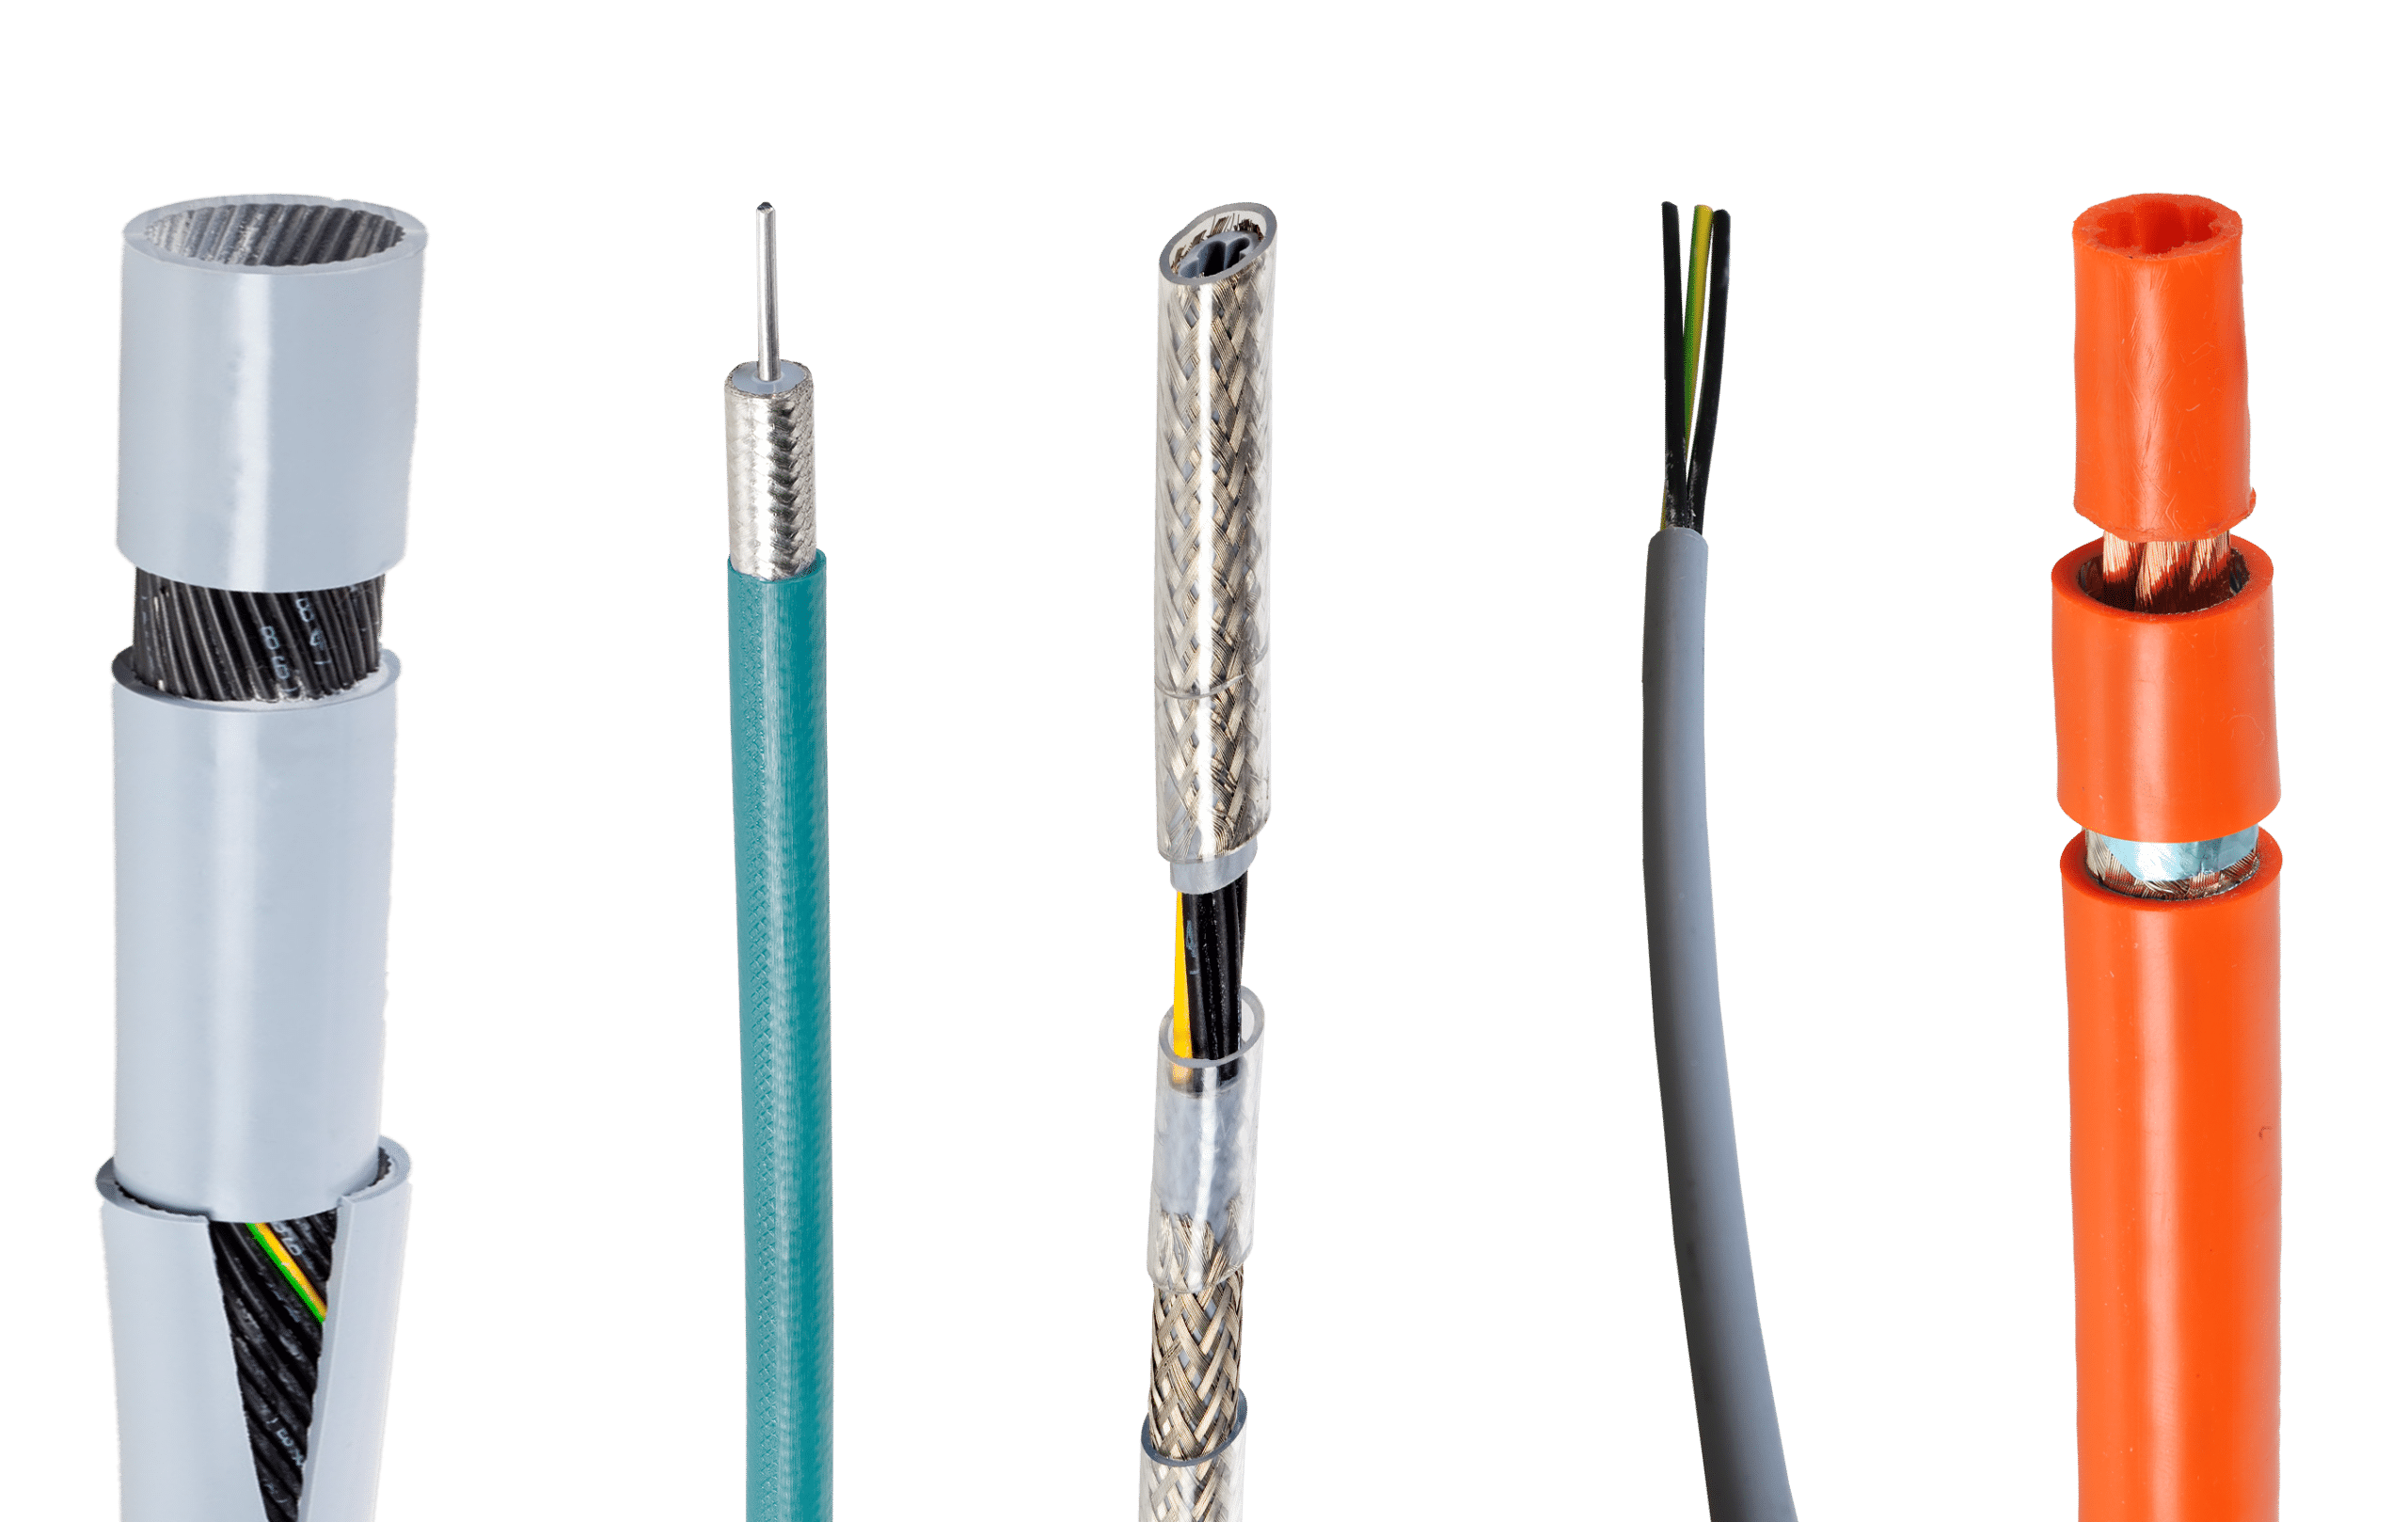 Different processed cables, cut and slit